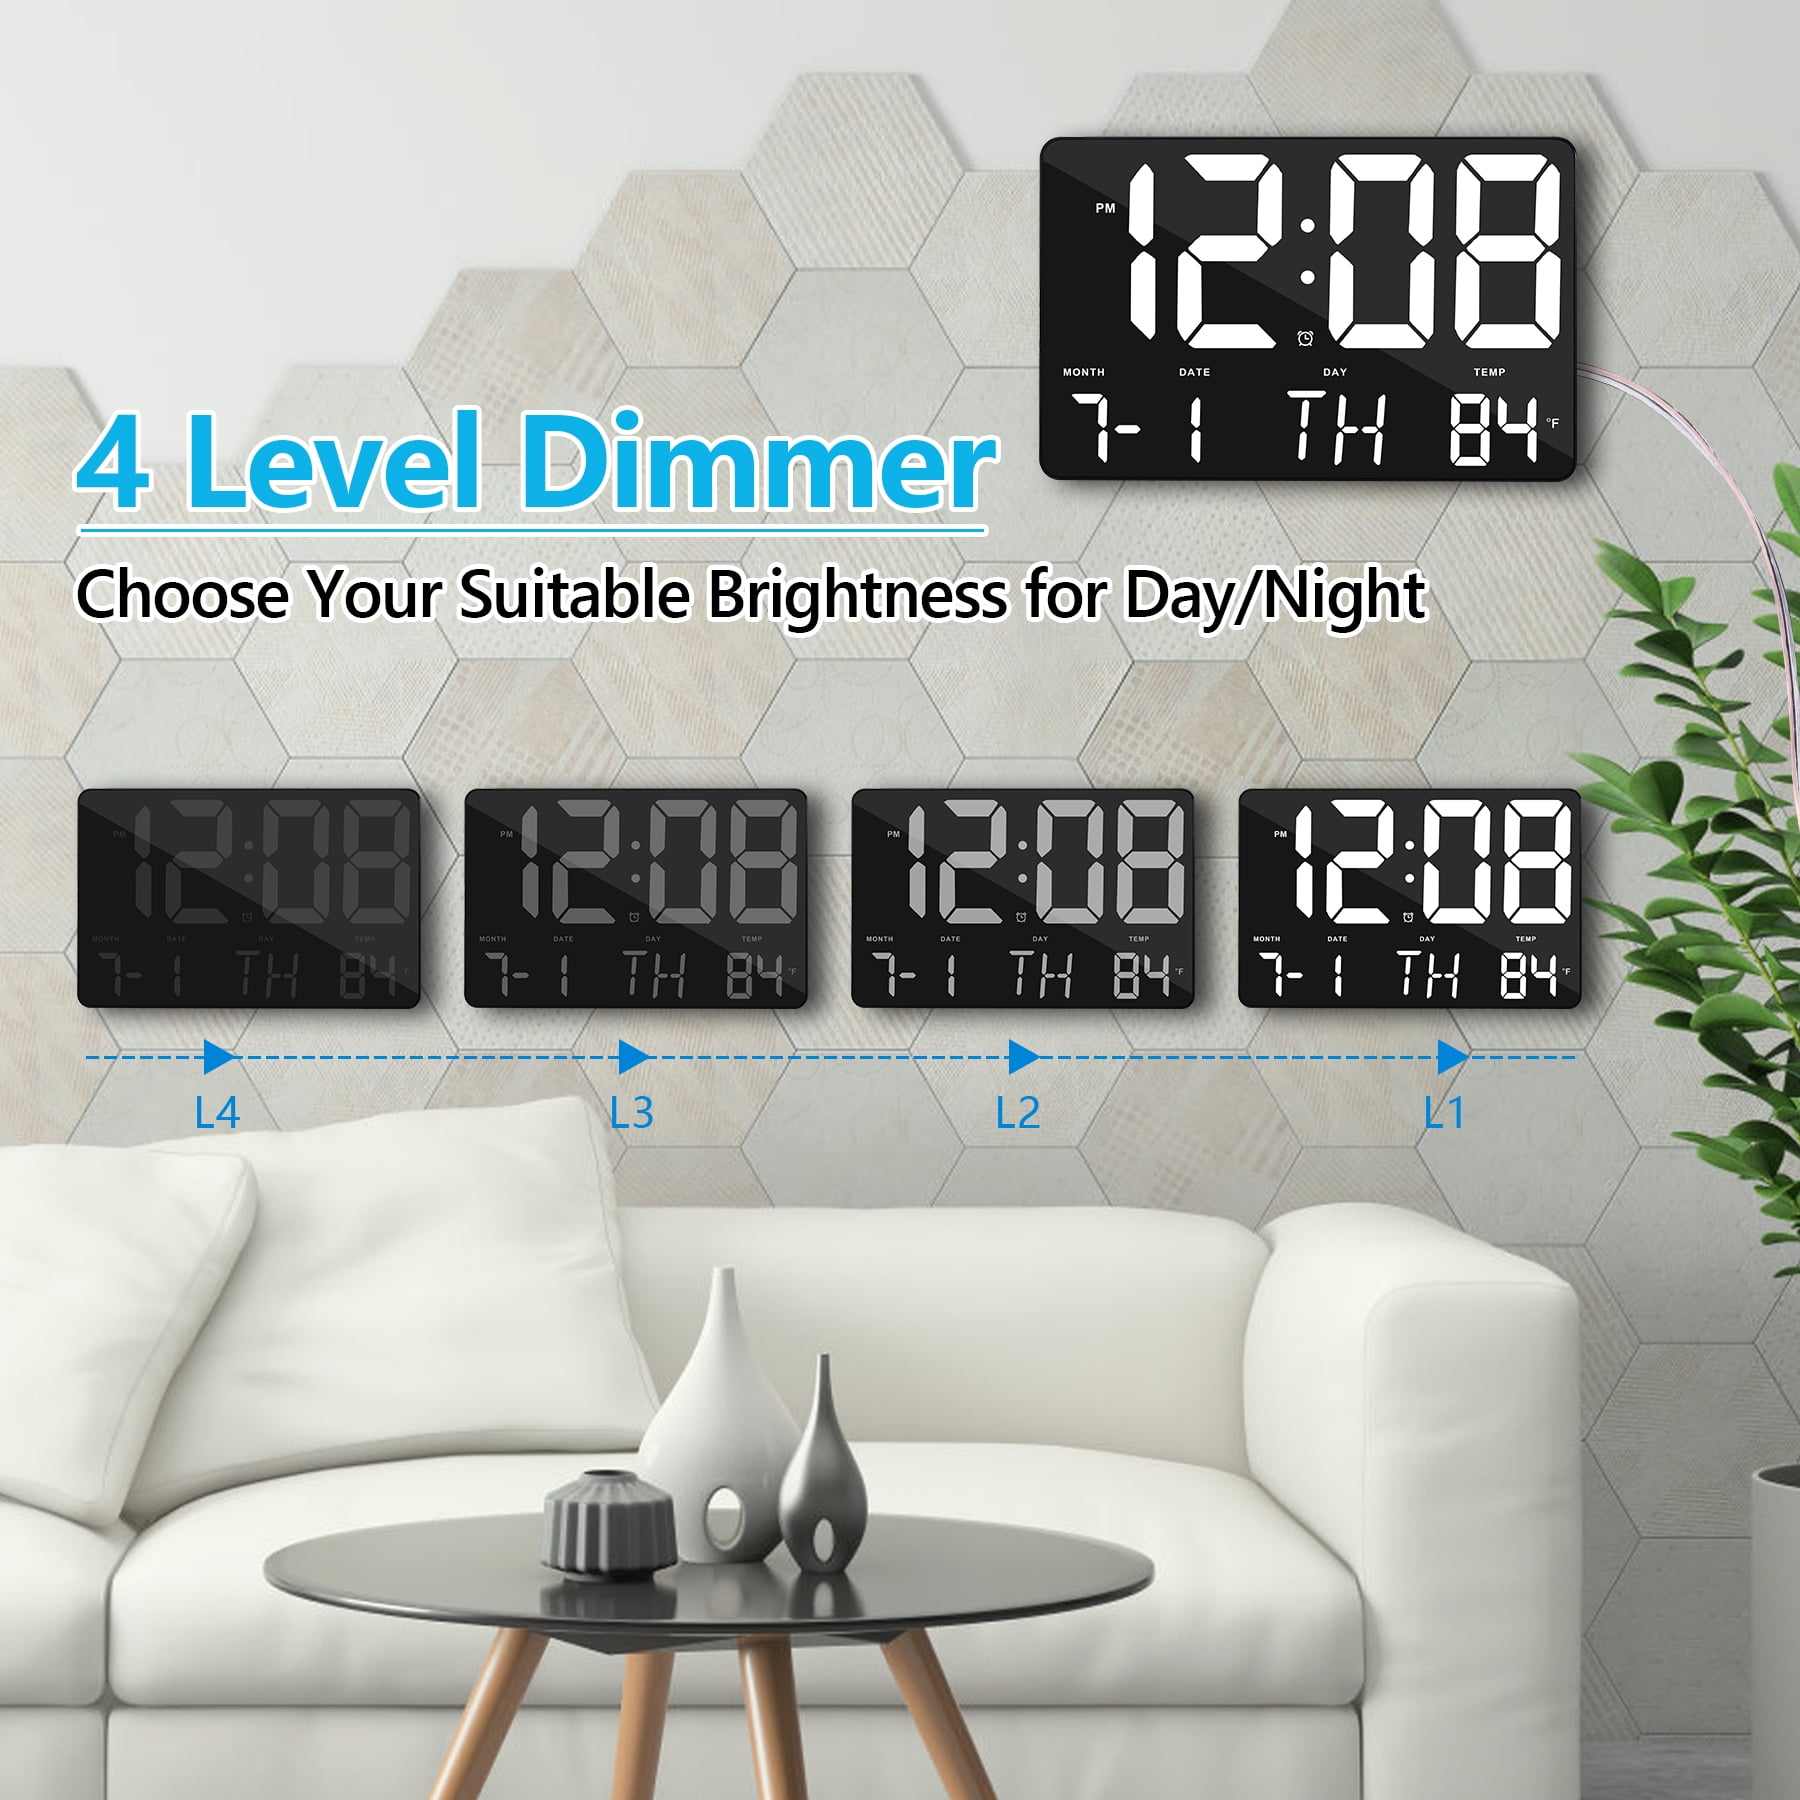 Buy Amgico Digital Wall Clock,11.4 Digital Clock Large Display with Remote  Control,Temperature,Calendar,12/24,Snooze,Adjustable Brightness,LED Large Alarm  Clock for Bedroom,Living Room, Seniors, Elderly Online at Low Prices in  India 